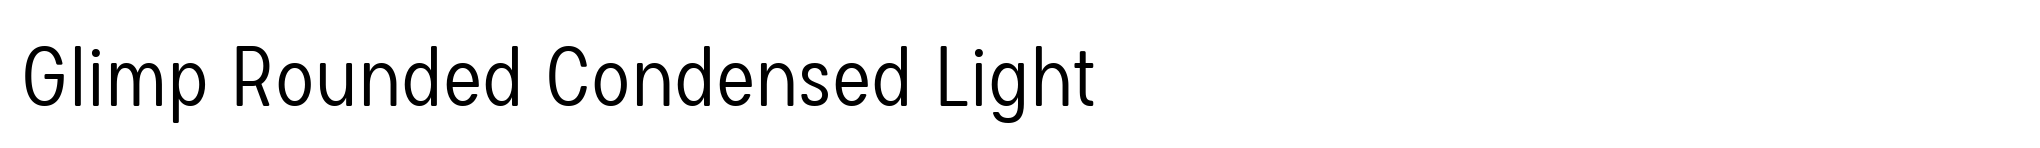 Glimp Rounded Condensed Light image